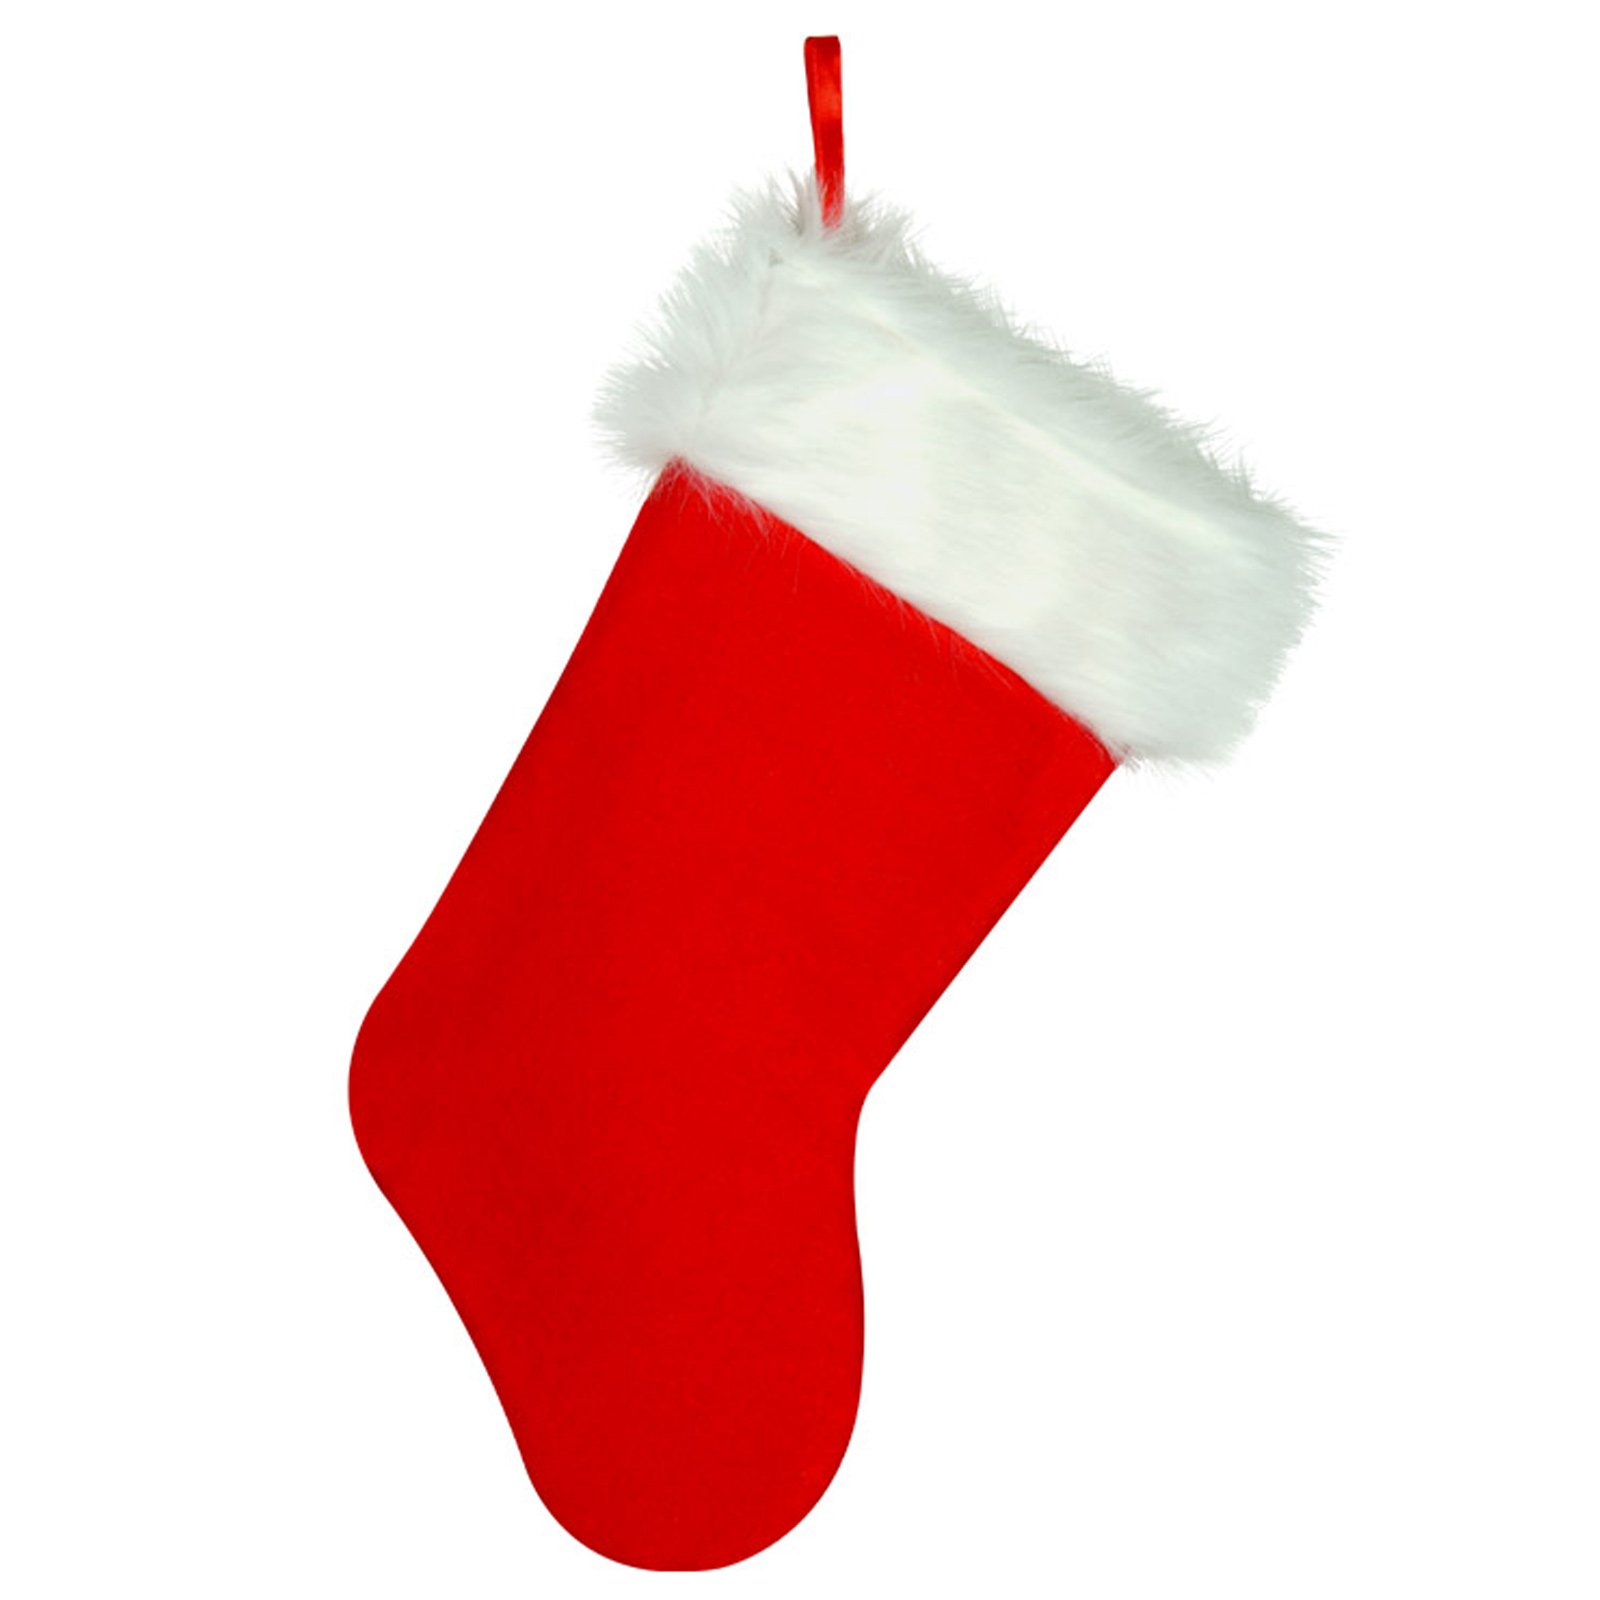 Pics Of Christmas Stockings - Clipart library